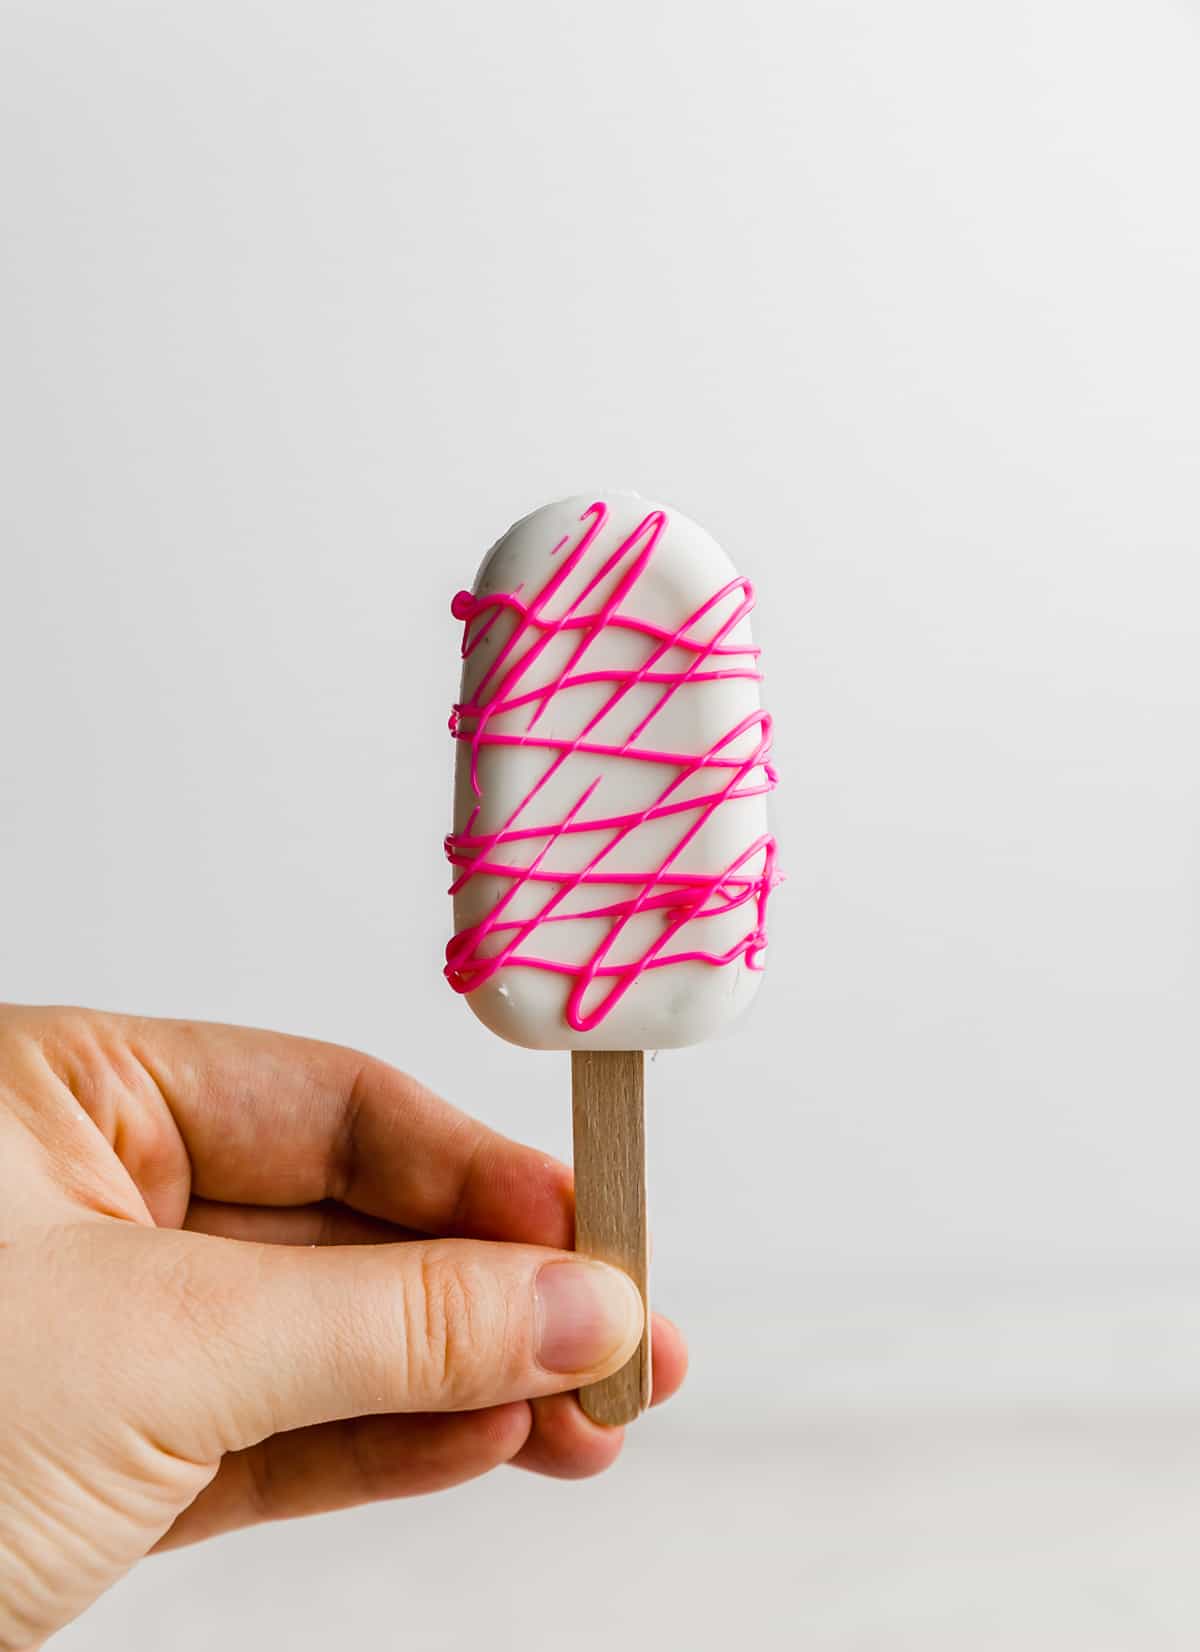 A hand holding up a white chocolate covered Cakesicle drizzled with hot pink chocolate.